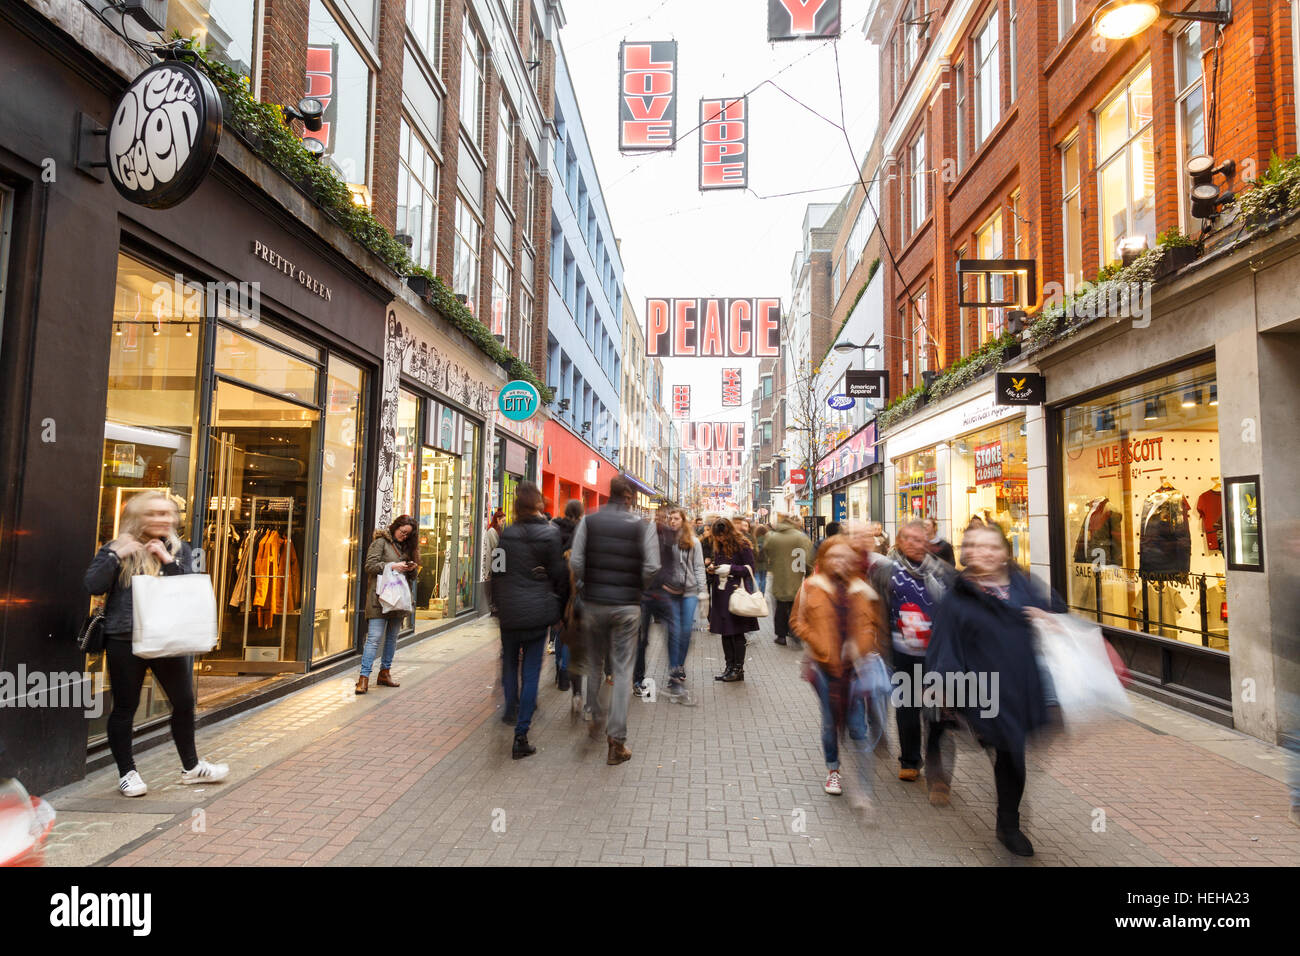 People Christmas shopping in motion blur on Carnaby Street, London. In ...